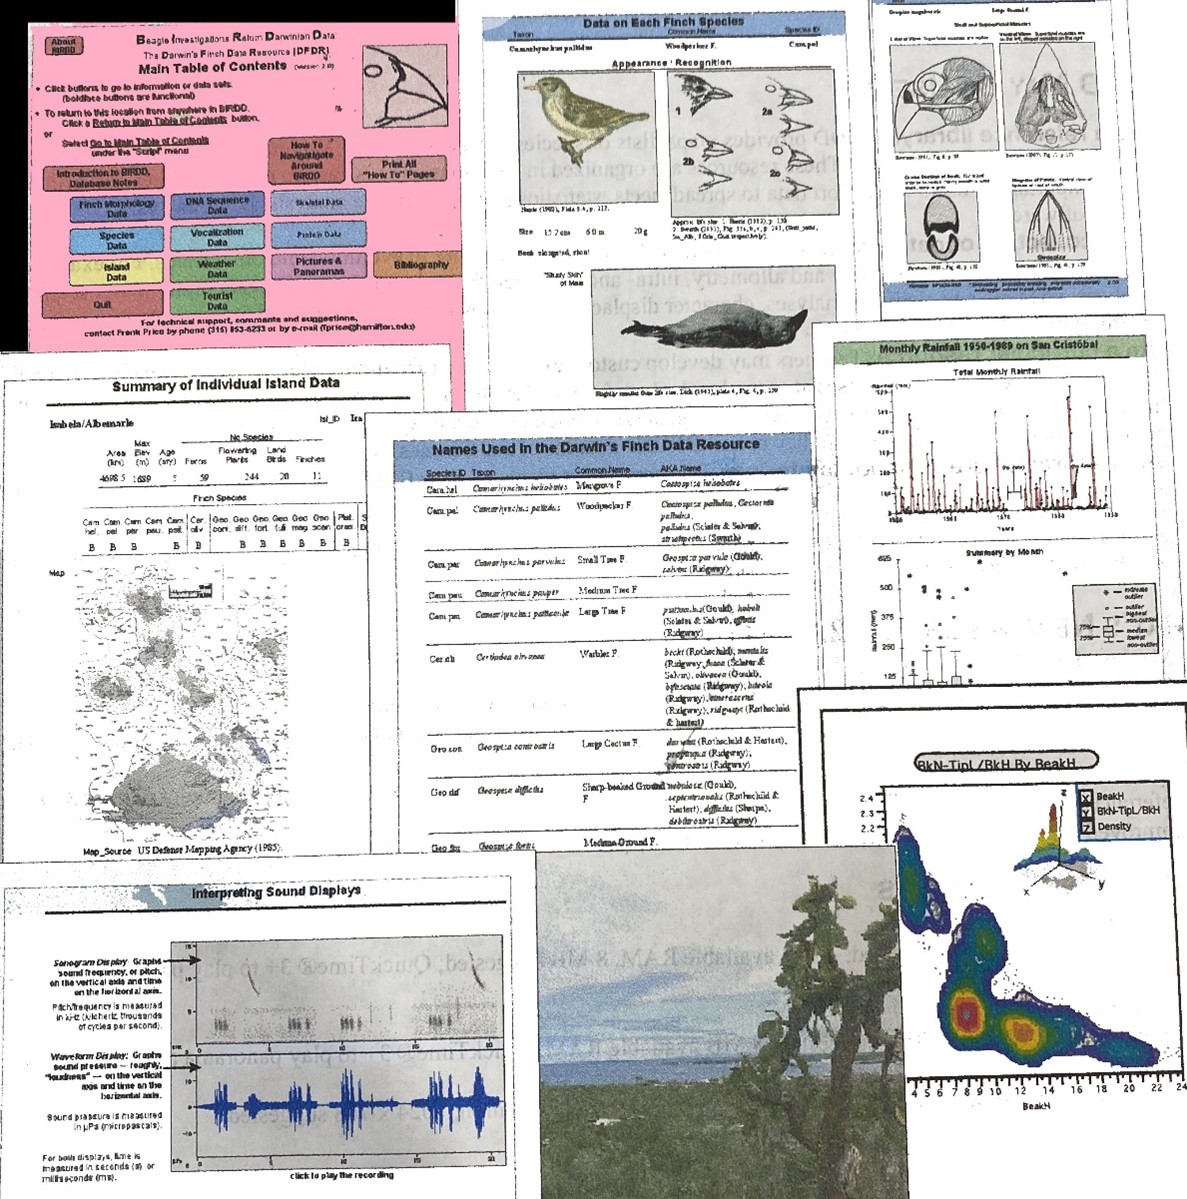 Collage of images from BIRDD 2.0 published on a CD in the Academic Press version of the BioQUEST Library. Frank built interfaces for dealing with numerous types of data: morphological, acoustic, video, taxonomic, geographic, sequence, and weather as well as historical data on different names of the islands. 